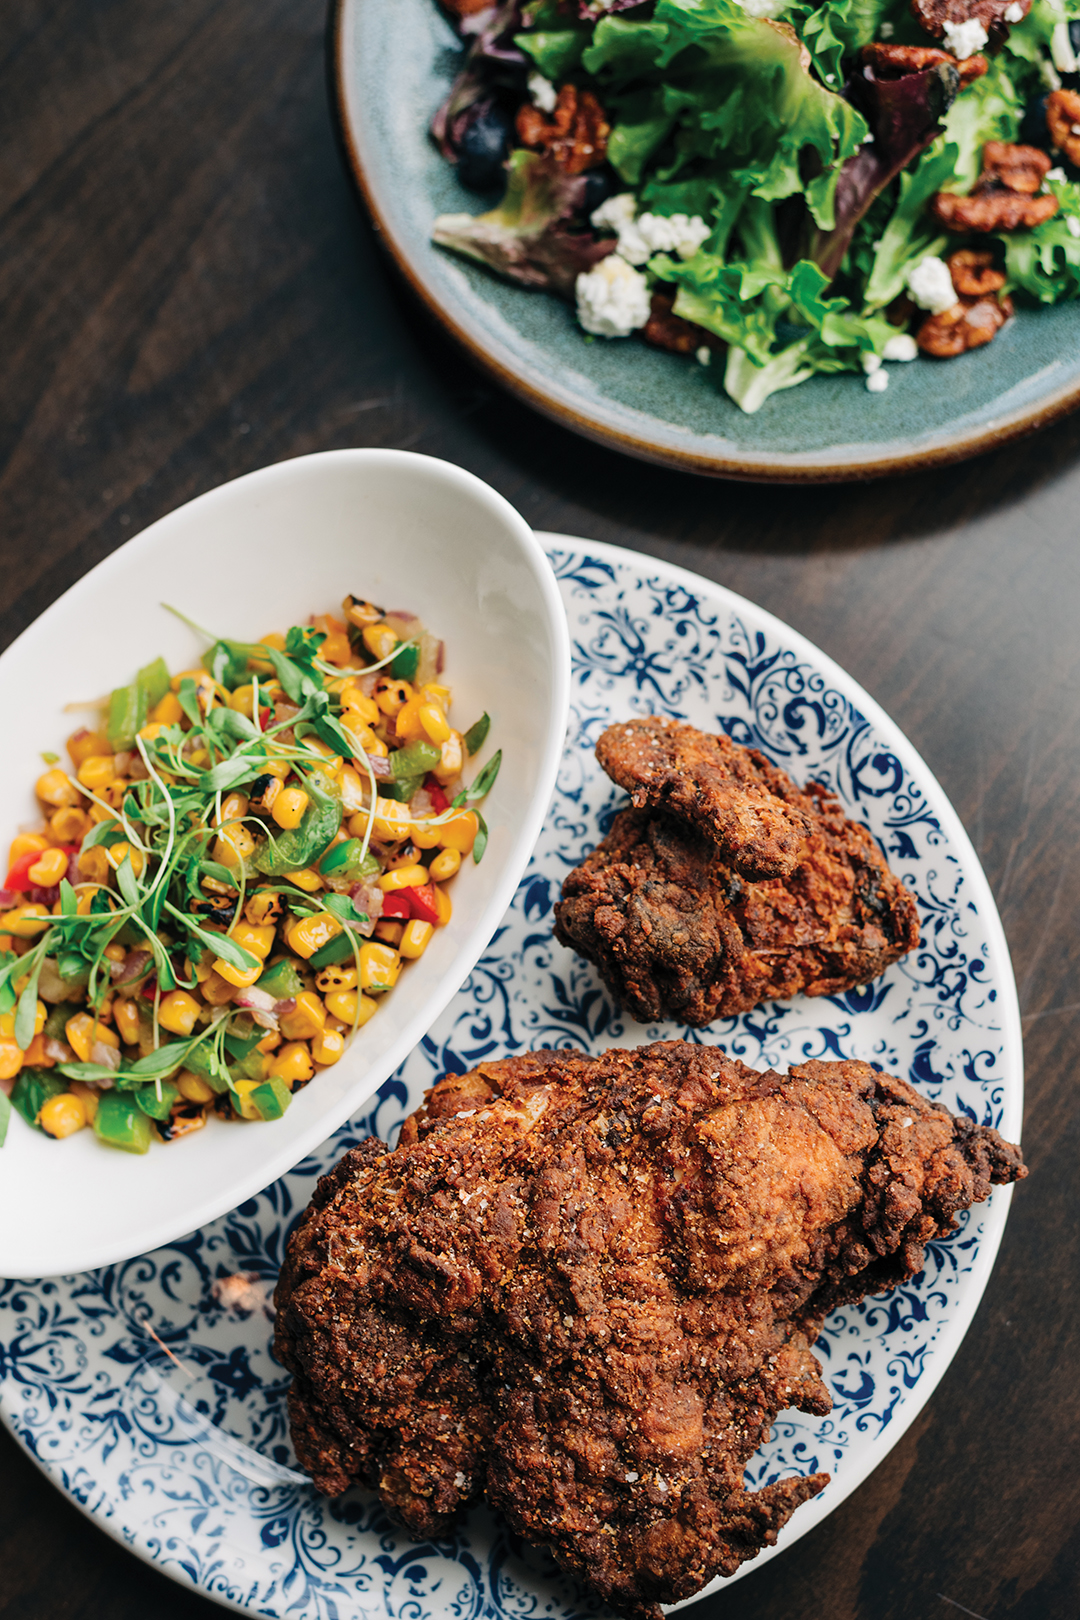 Fried Chicken with Collard Greens and Roasted Corn